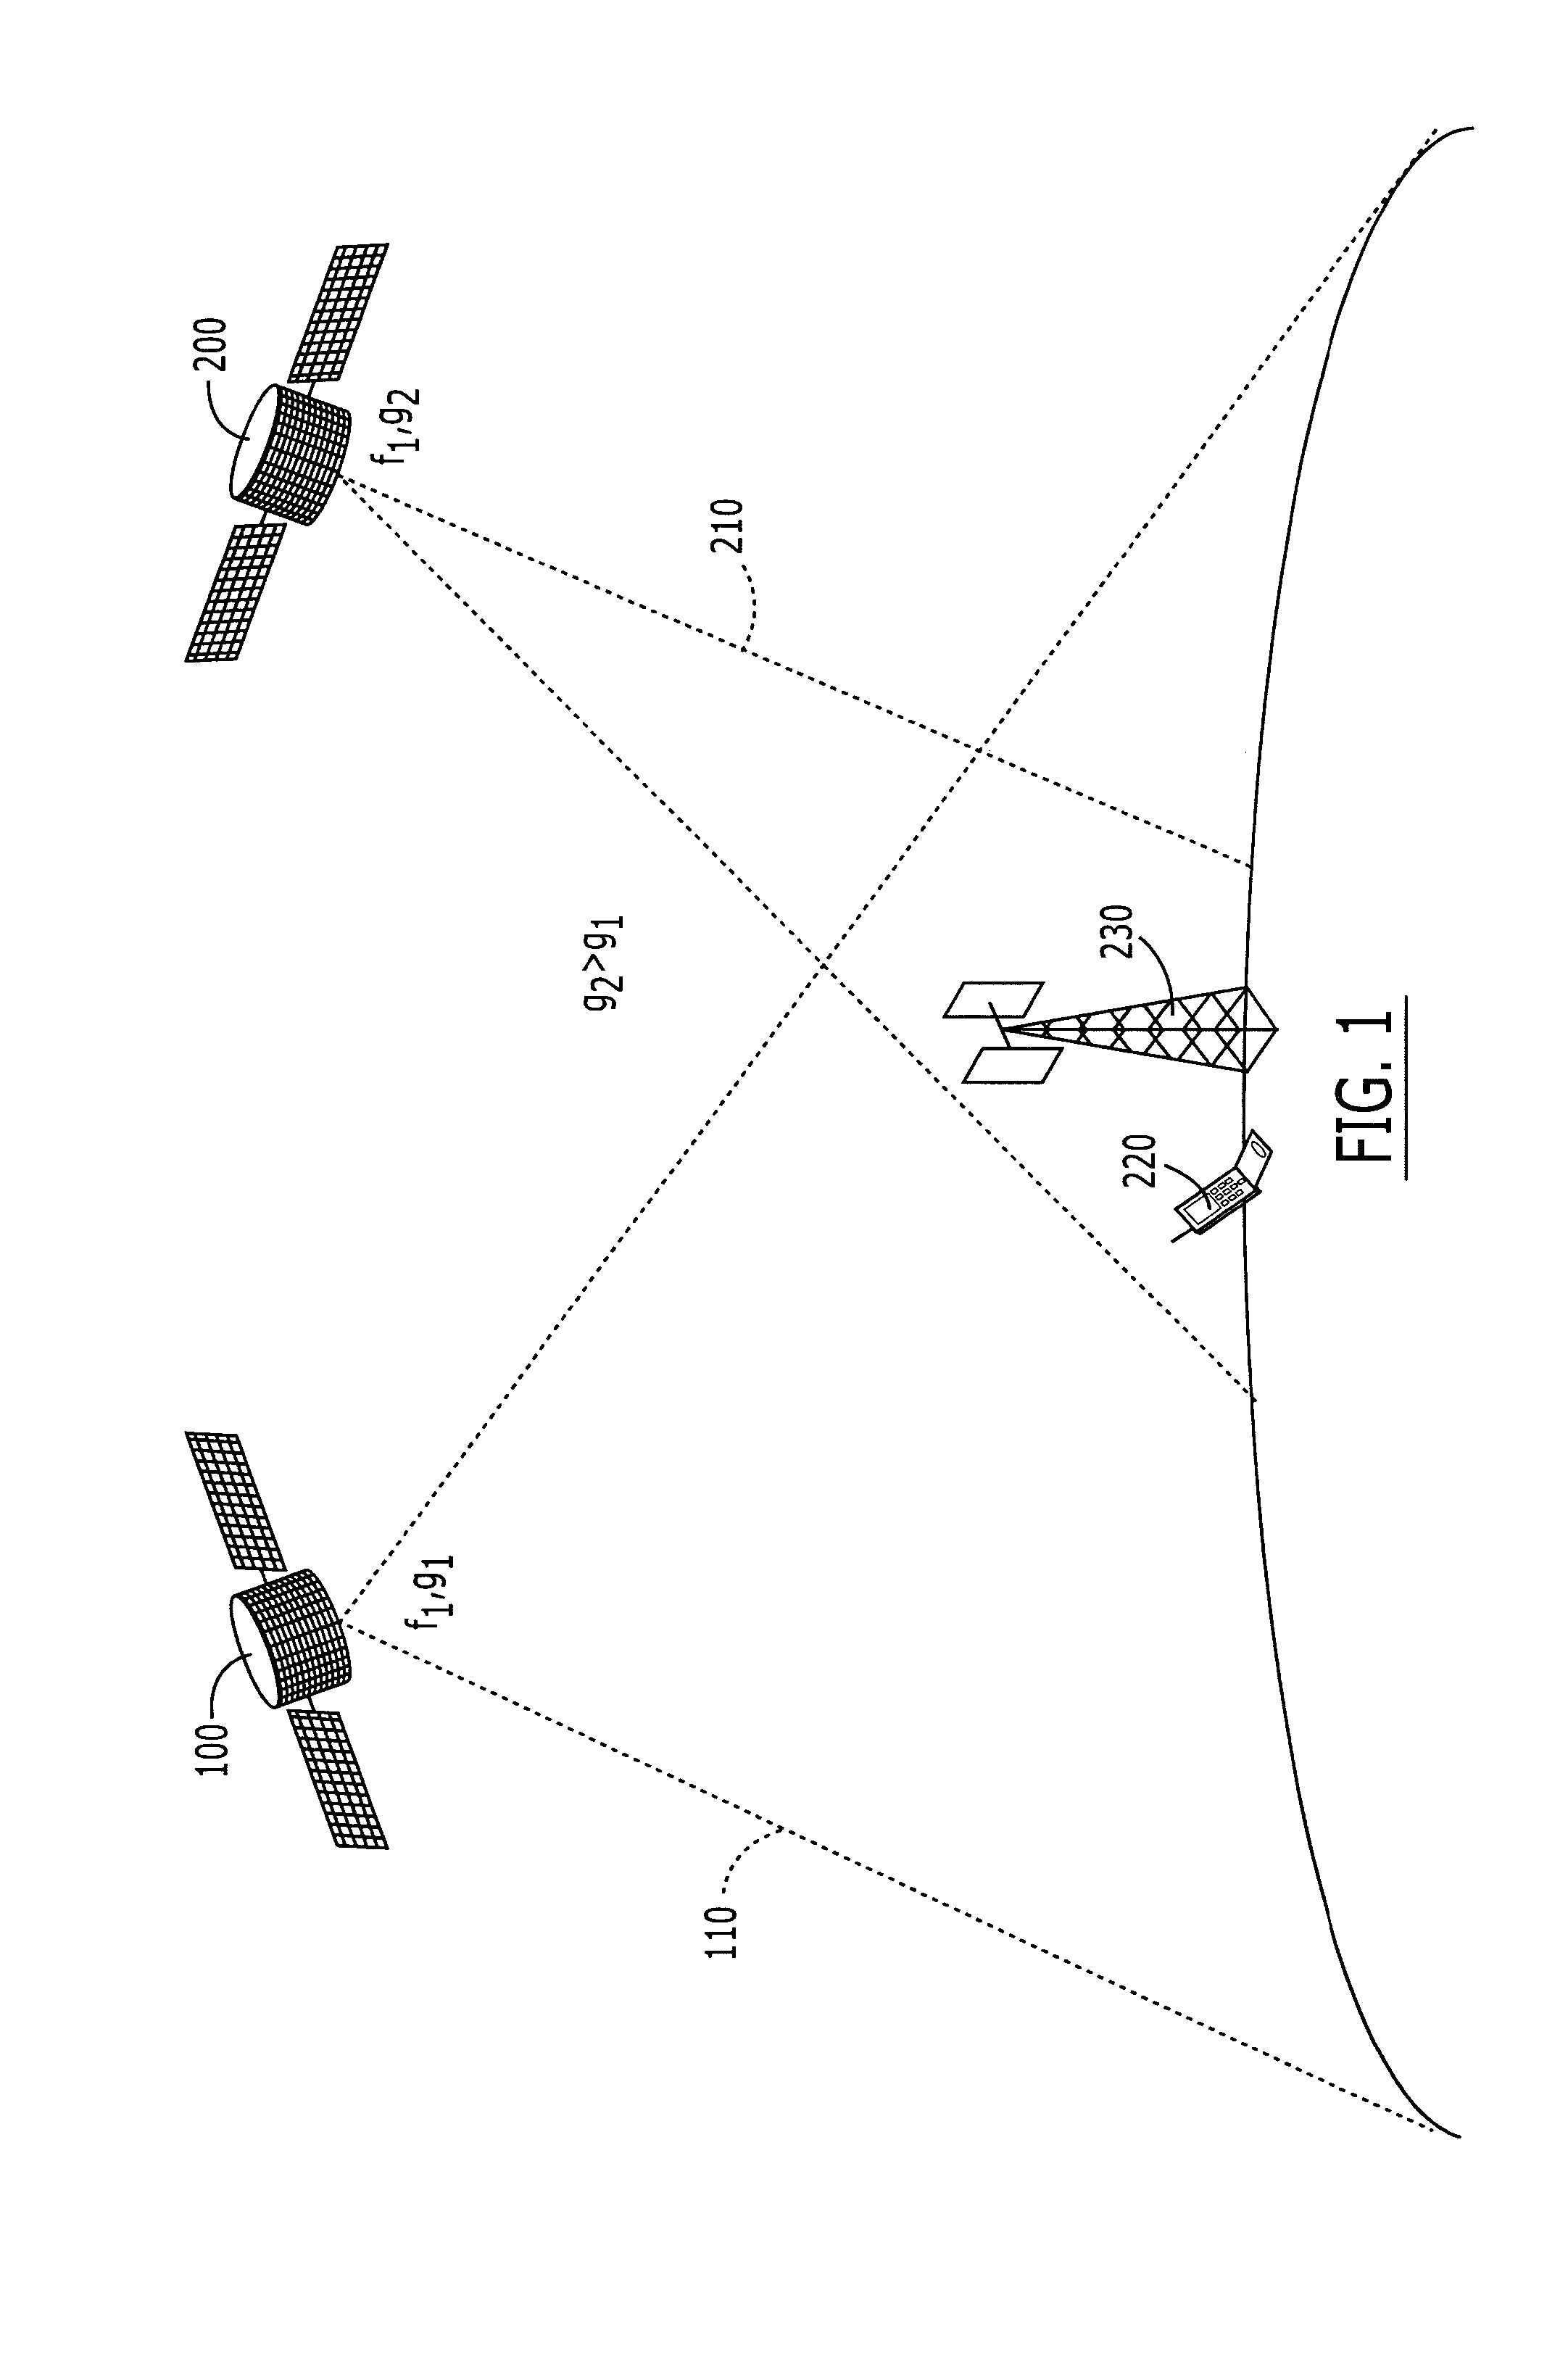 Systems and methods for inter-system sharing of satellite communications frequencies within a common footprint